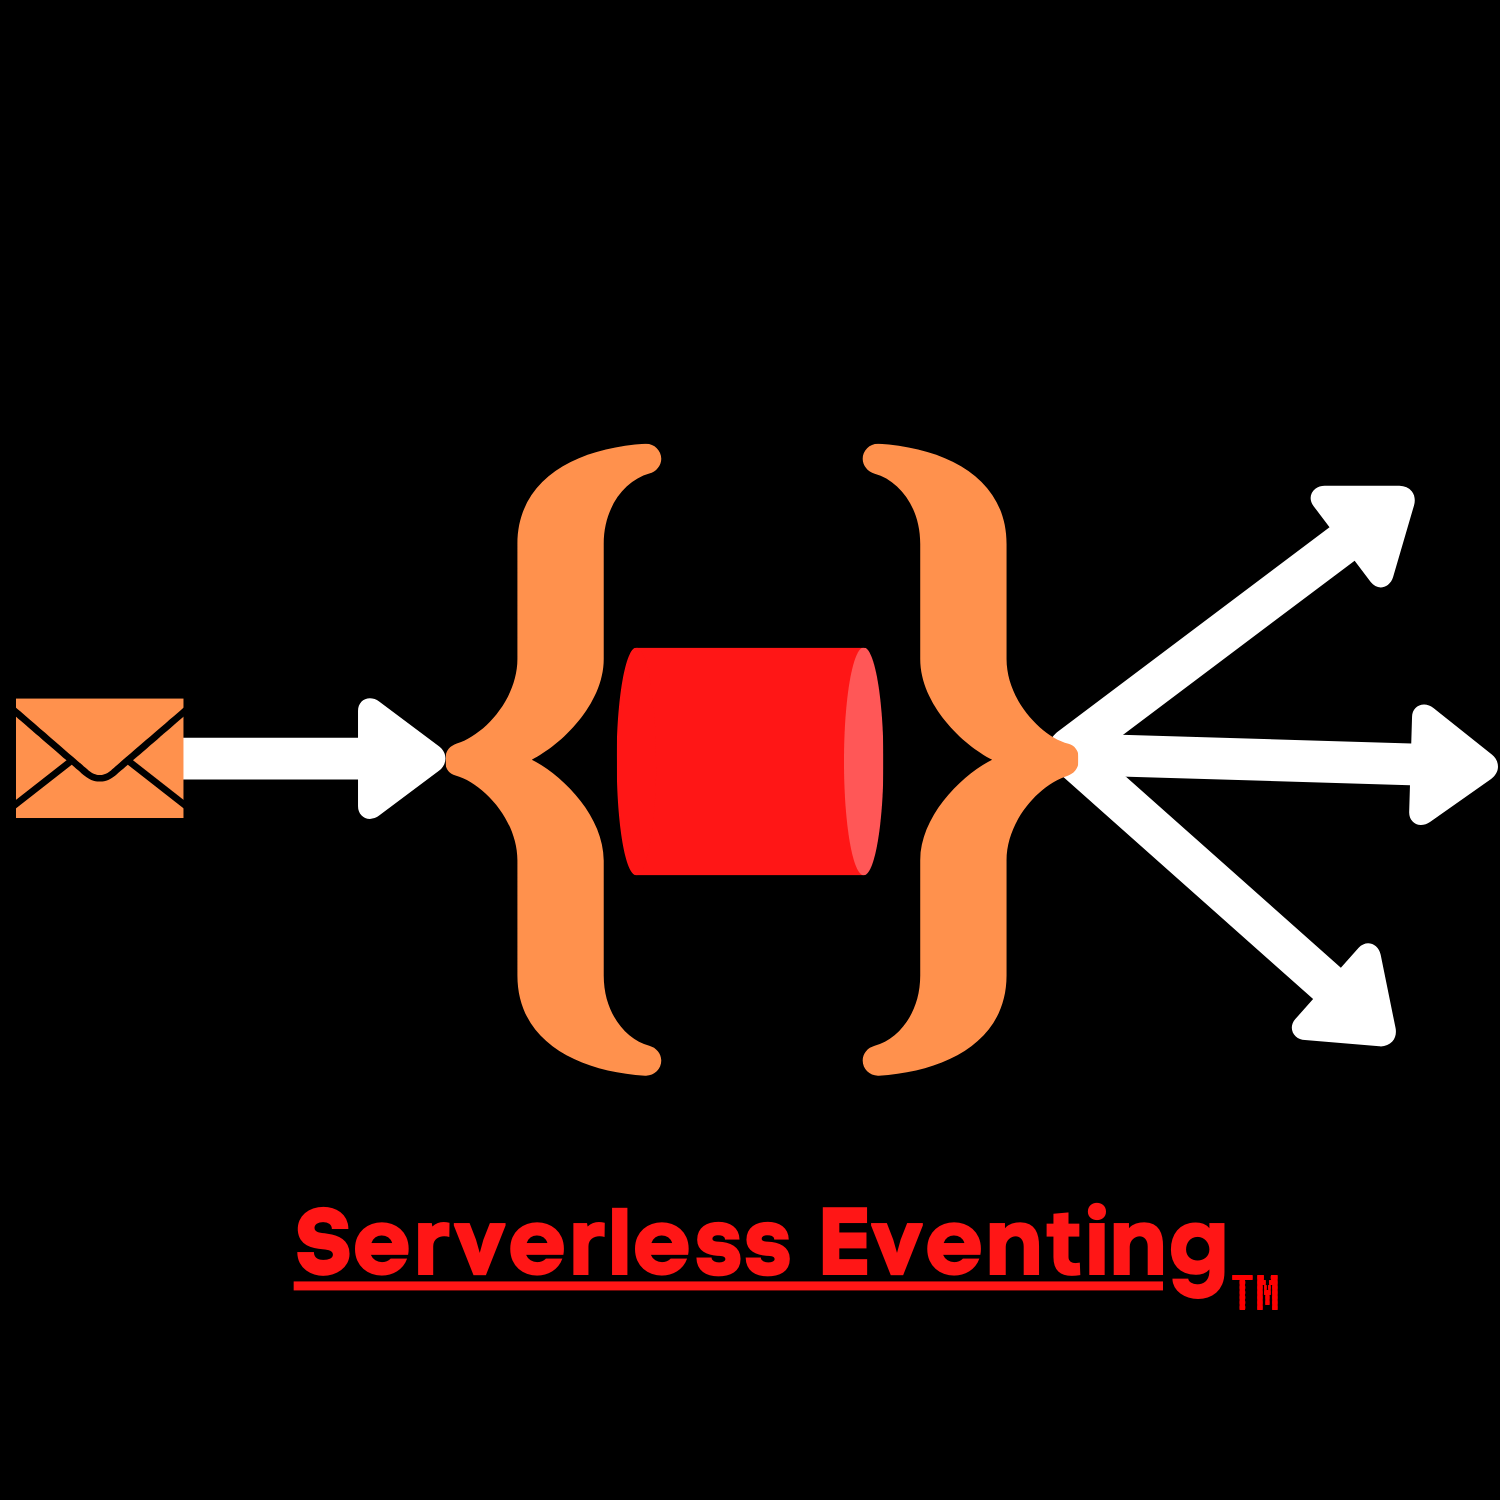 Serverless-Eventing-LG-1.png